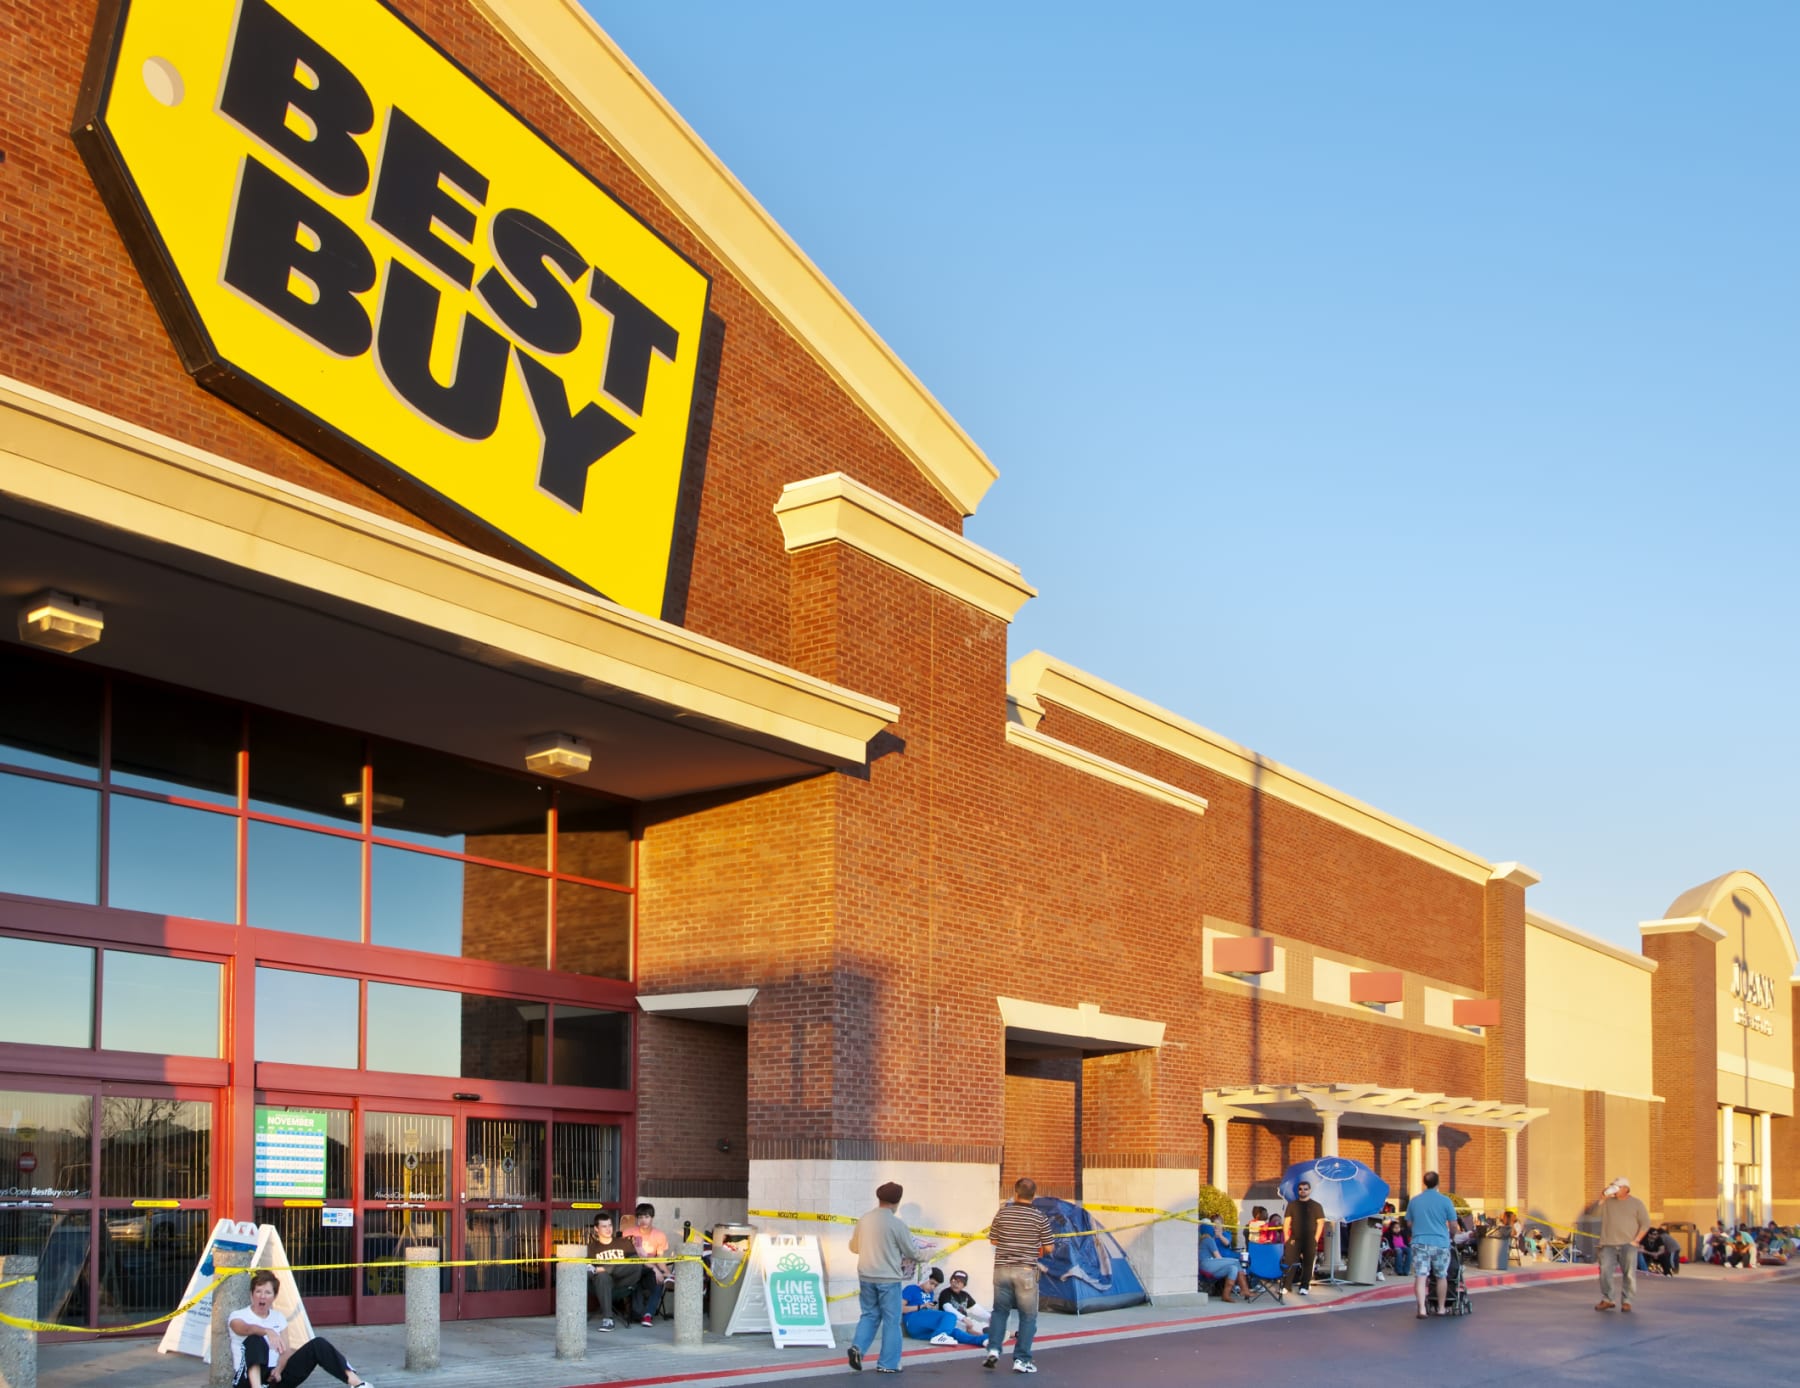 Shoppers camp out in front of Best Buy store.